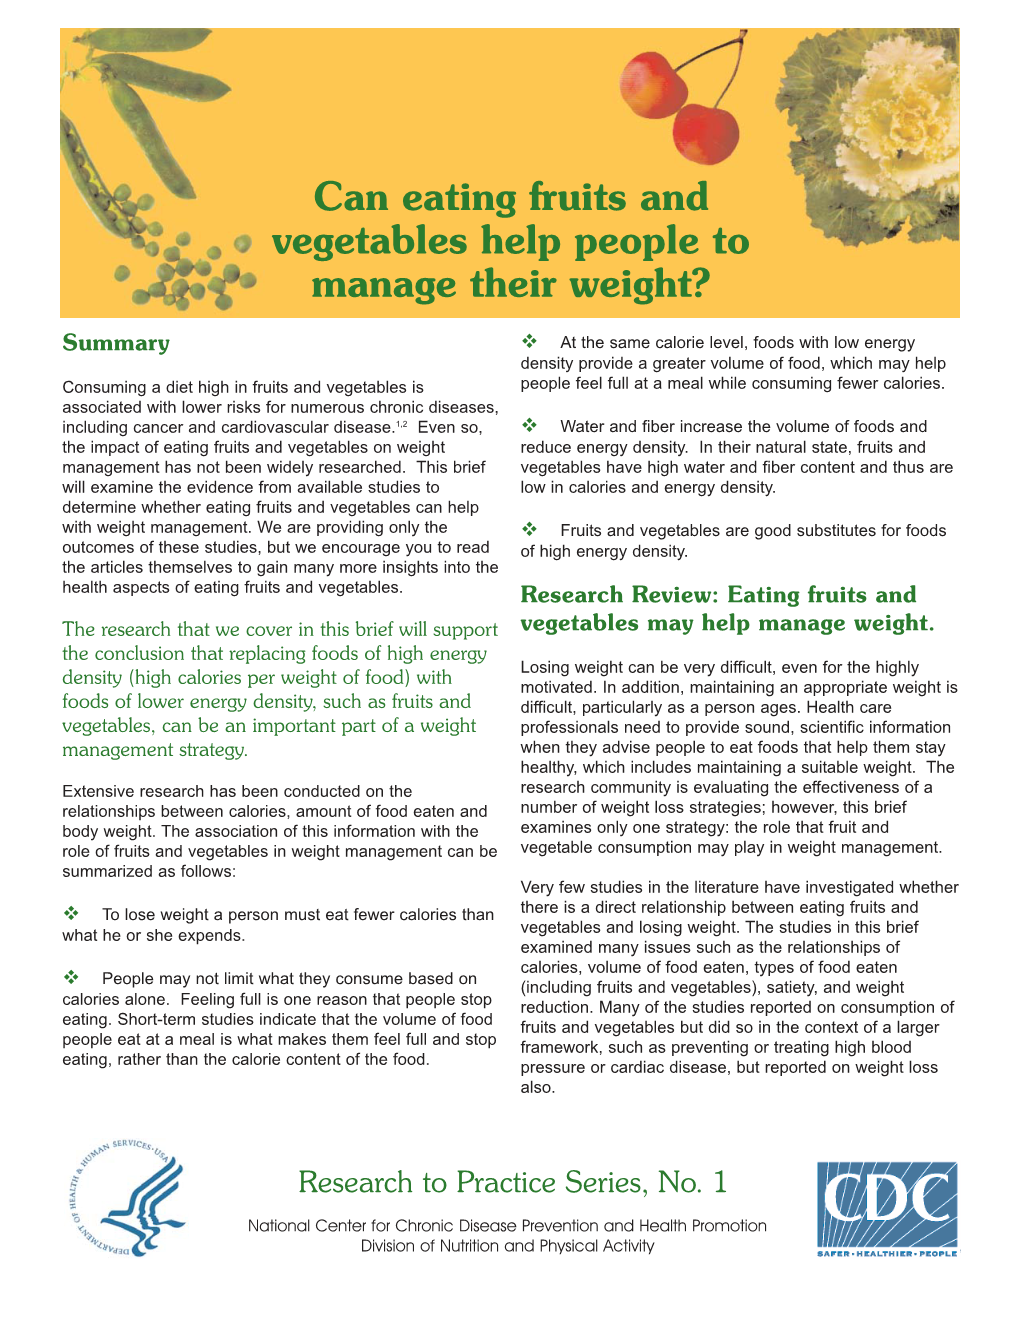 Can Eating Fruits and Vegetables Help People to Manage Their Weight?